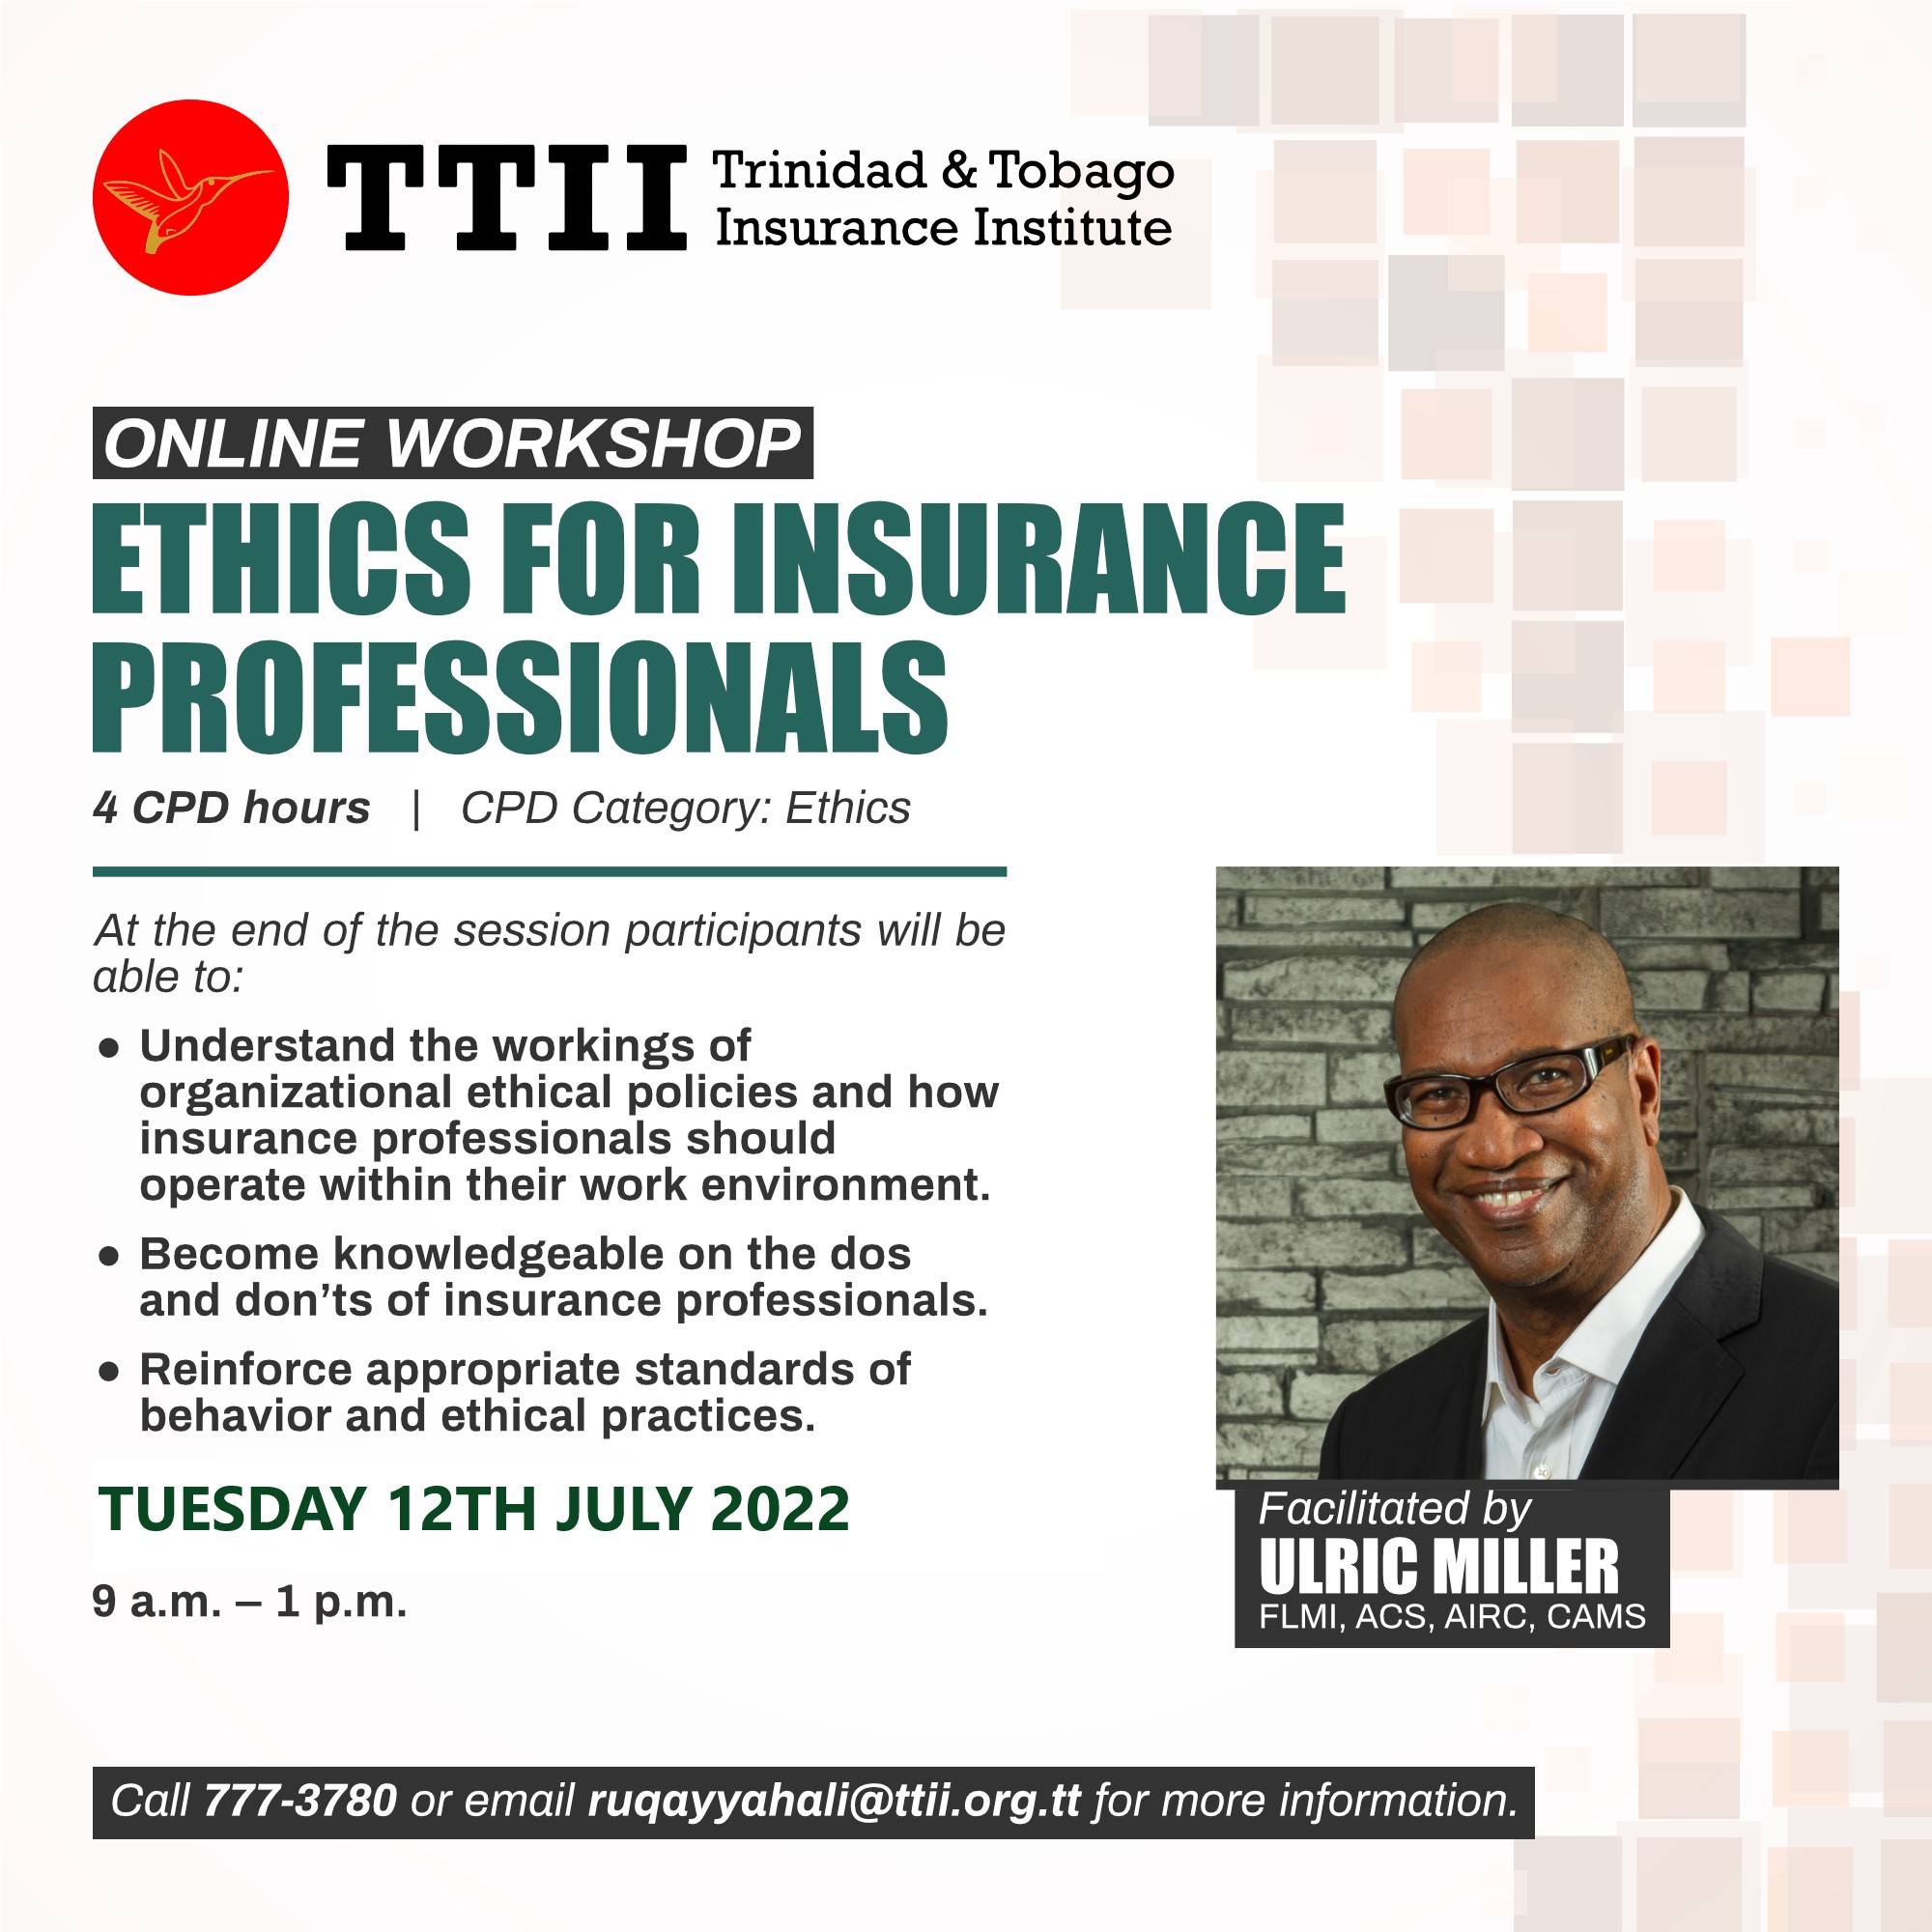 Ethics for Insurance Professionals